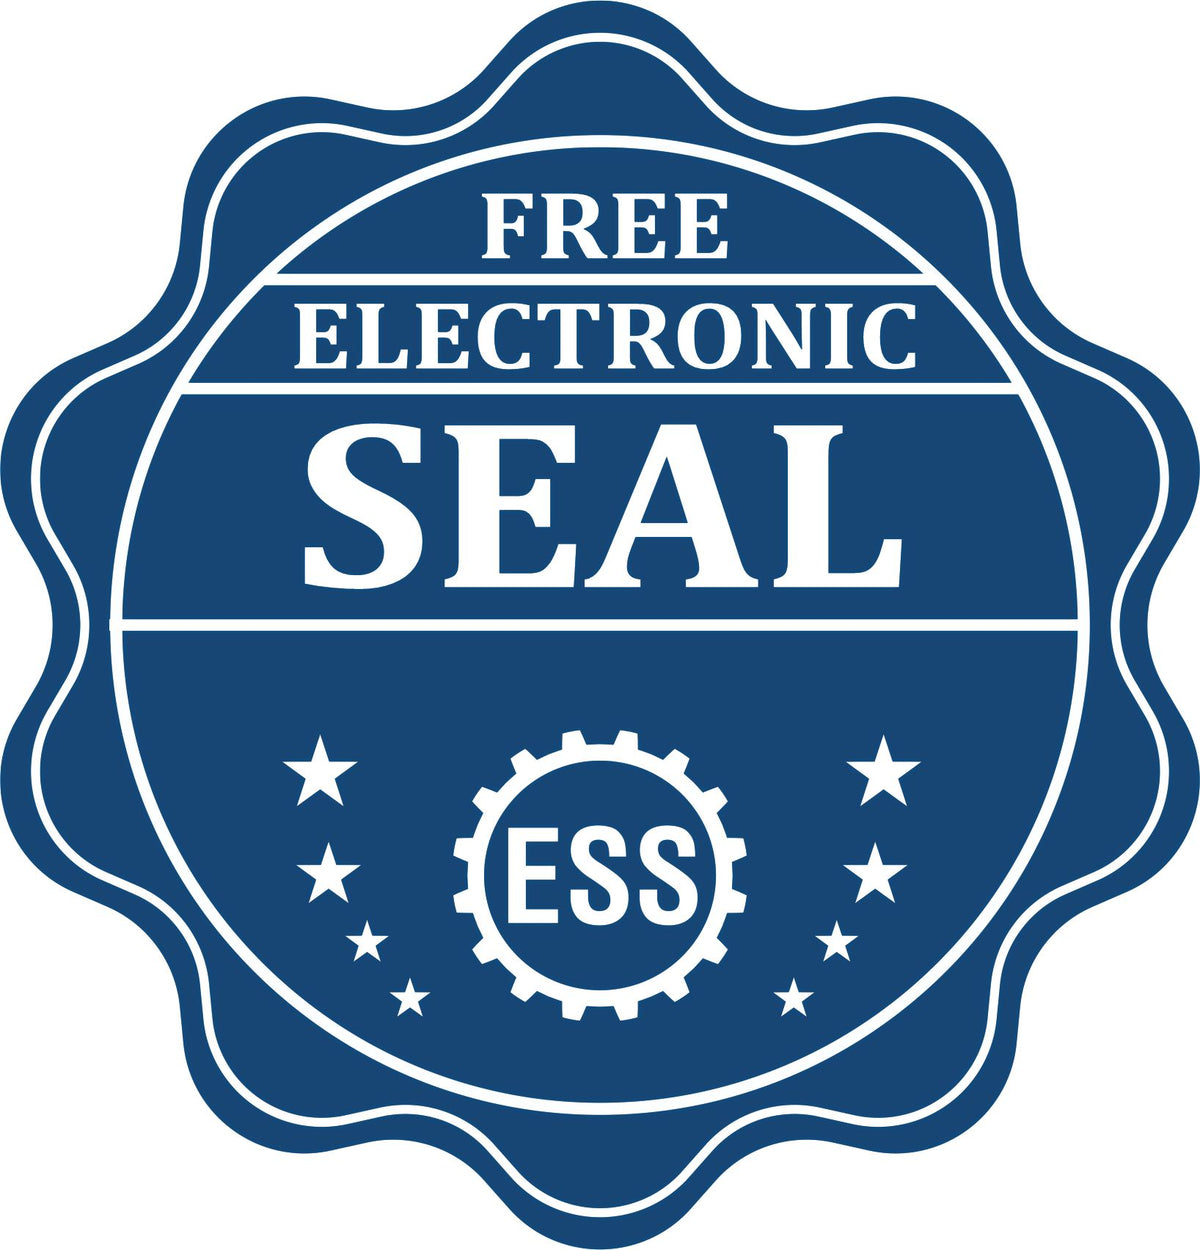 A badge showing a free electronic seal for the Hybrid Illinois Engineer Seal with stars and the ESS gear on the emblem.